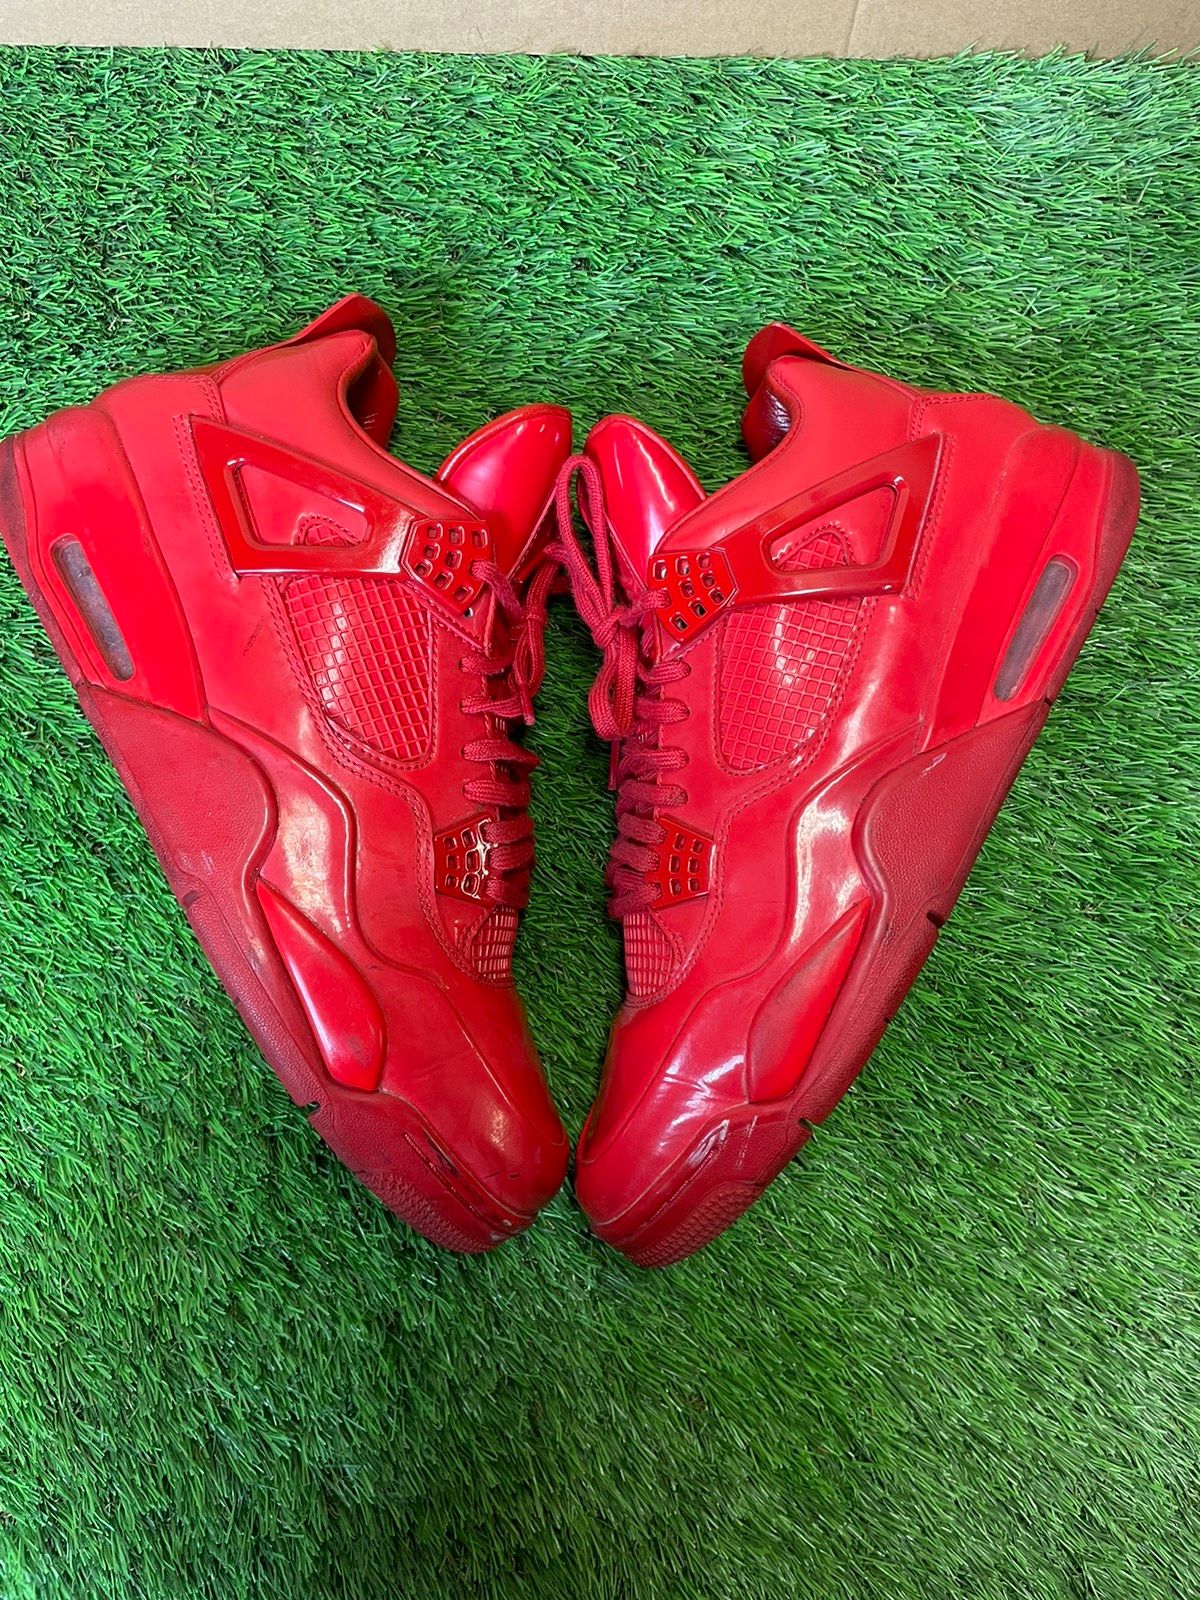 Pre-owned Jordan Brand 4 11lab4 Size 10.5 Used Shoes In Red